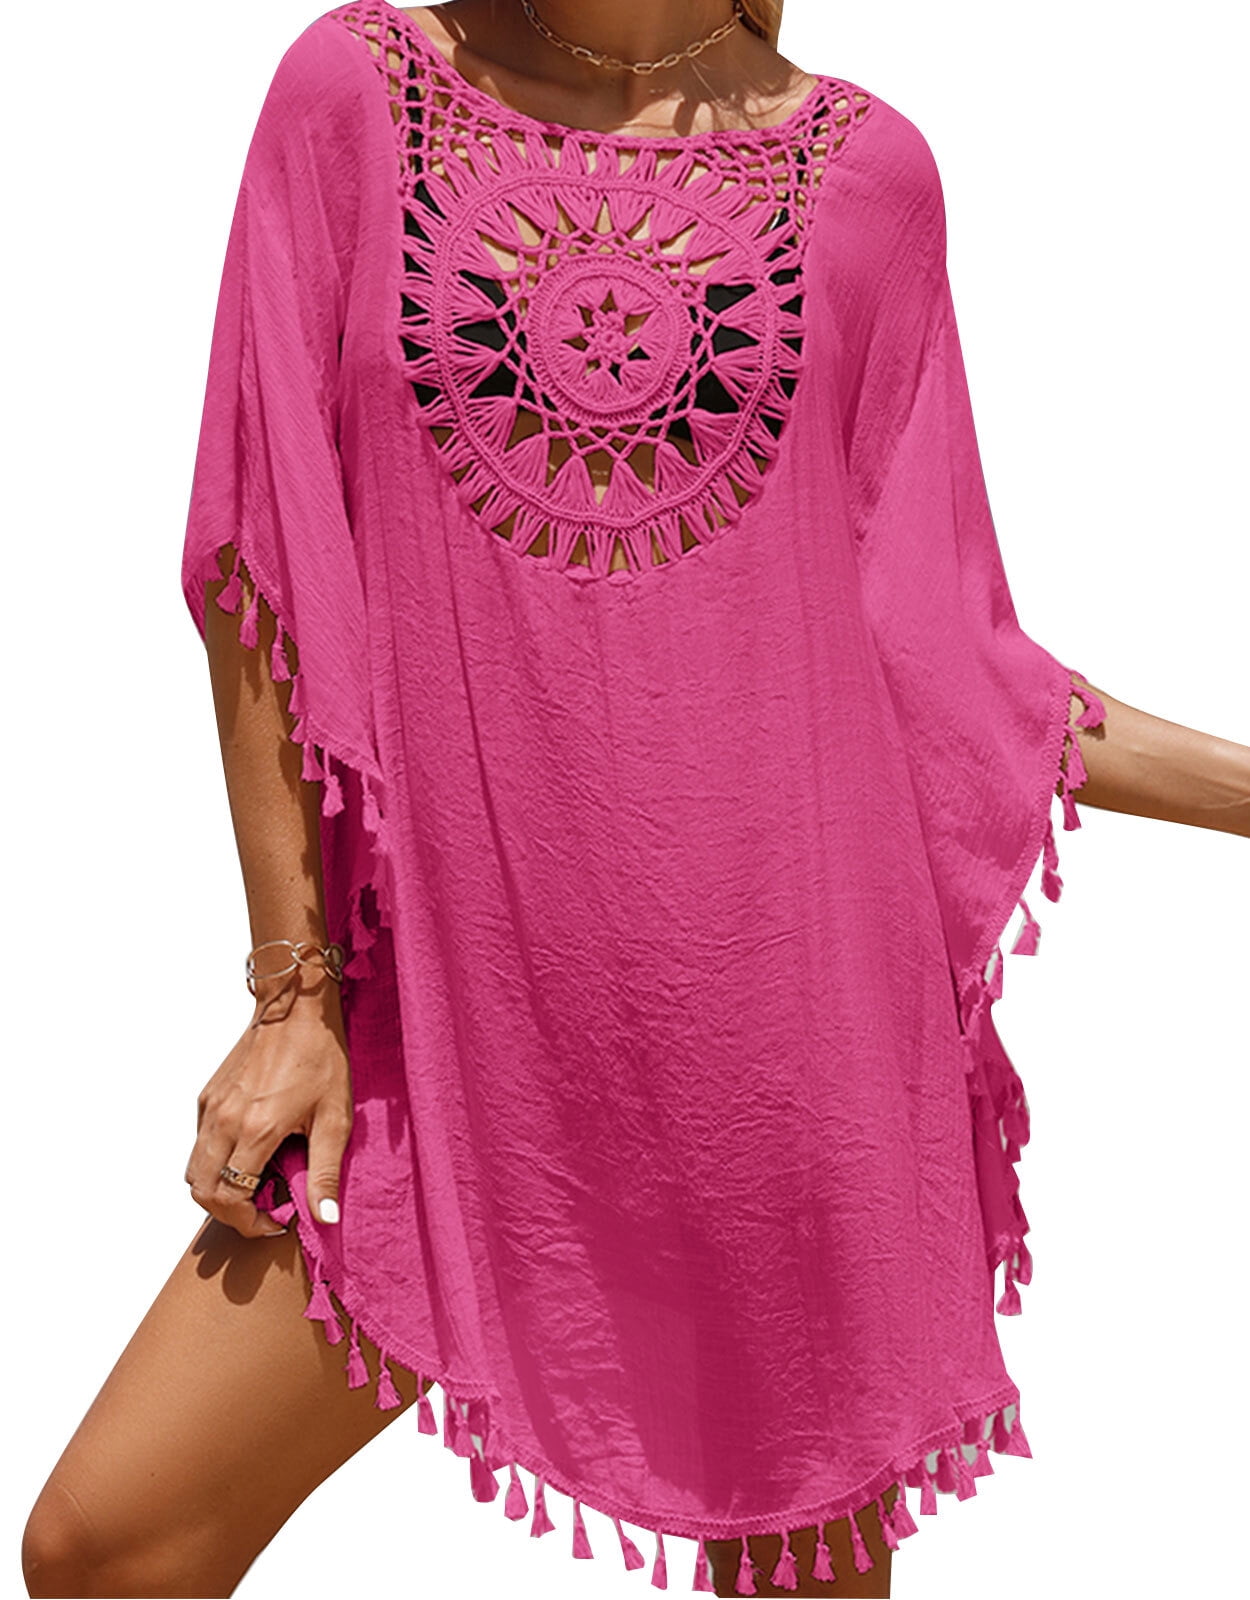 Swimsuit Cover Up for Women Plus Size Hollow Hand Crochet Neck Boho ...